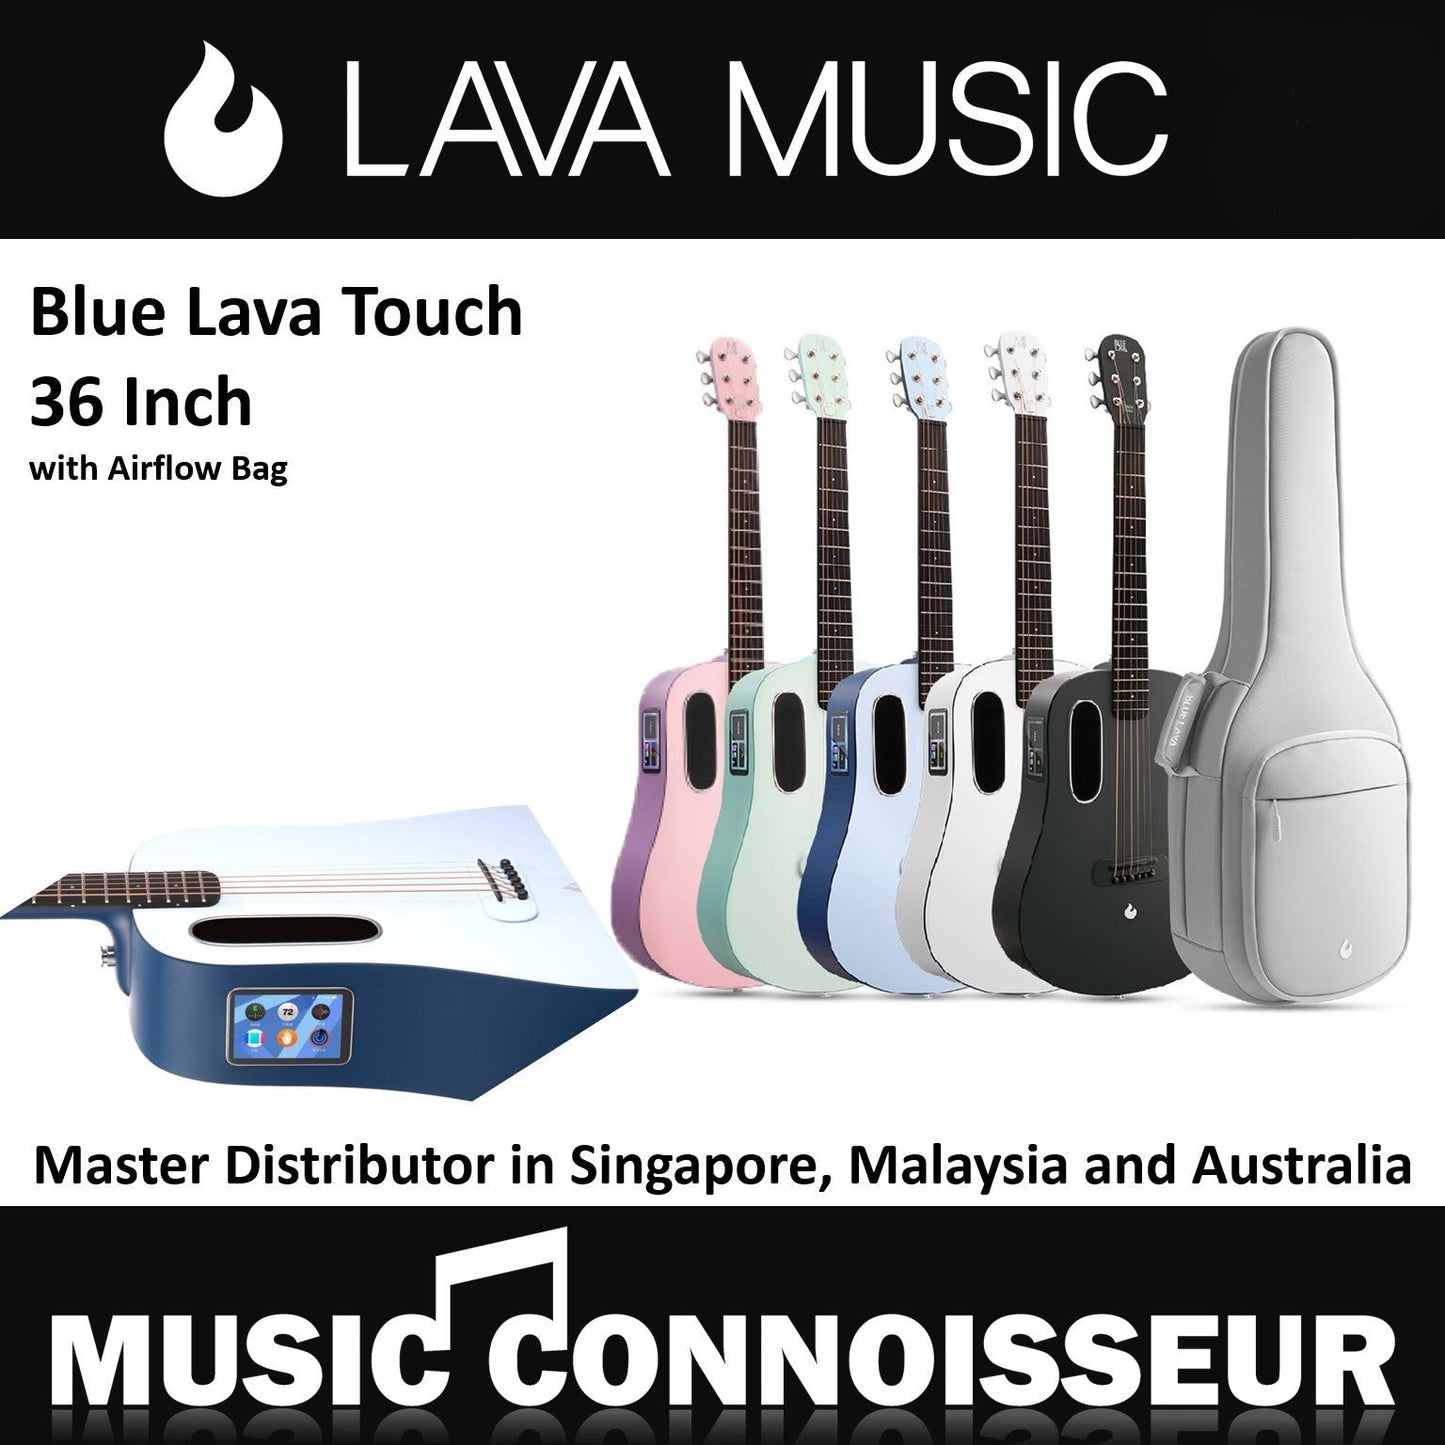 Blue Lava 36" Smart Guitar(Coral Pink with Lilac)